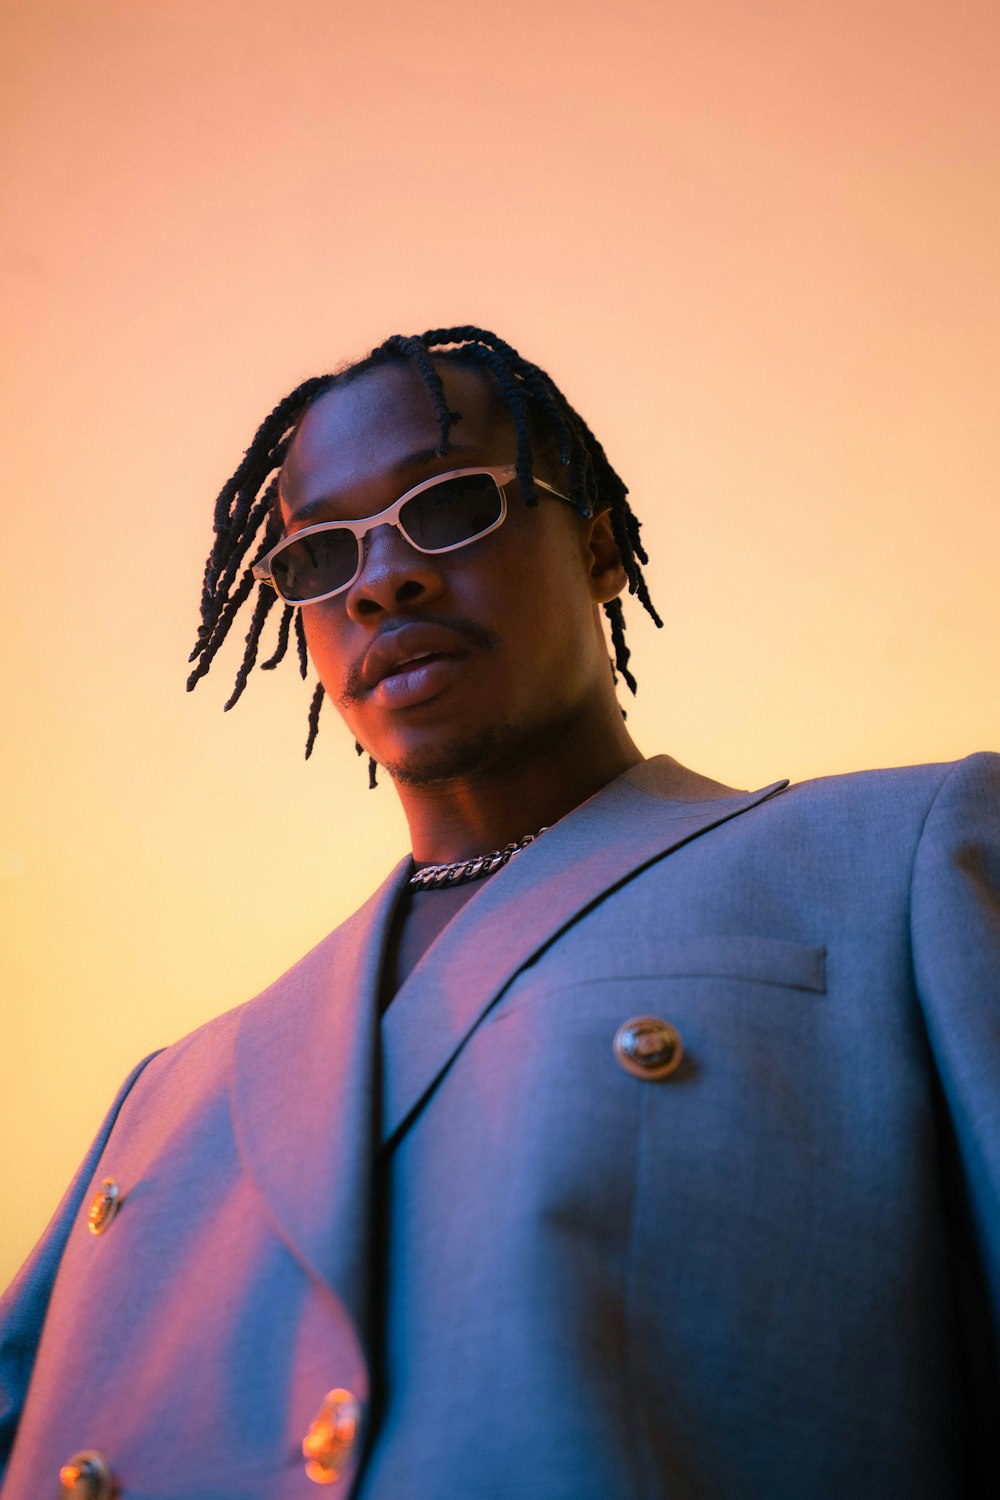 a man with dreadlocks wearing a suit and sunglasses